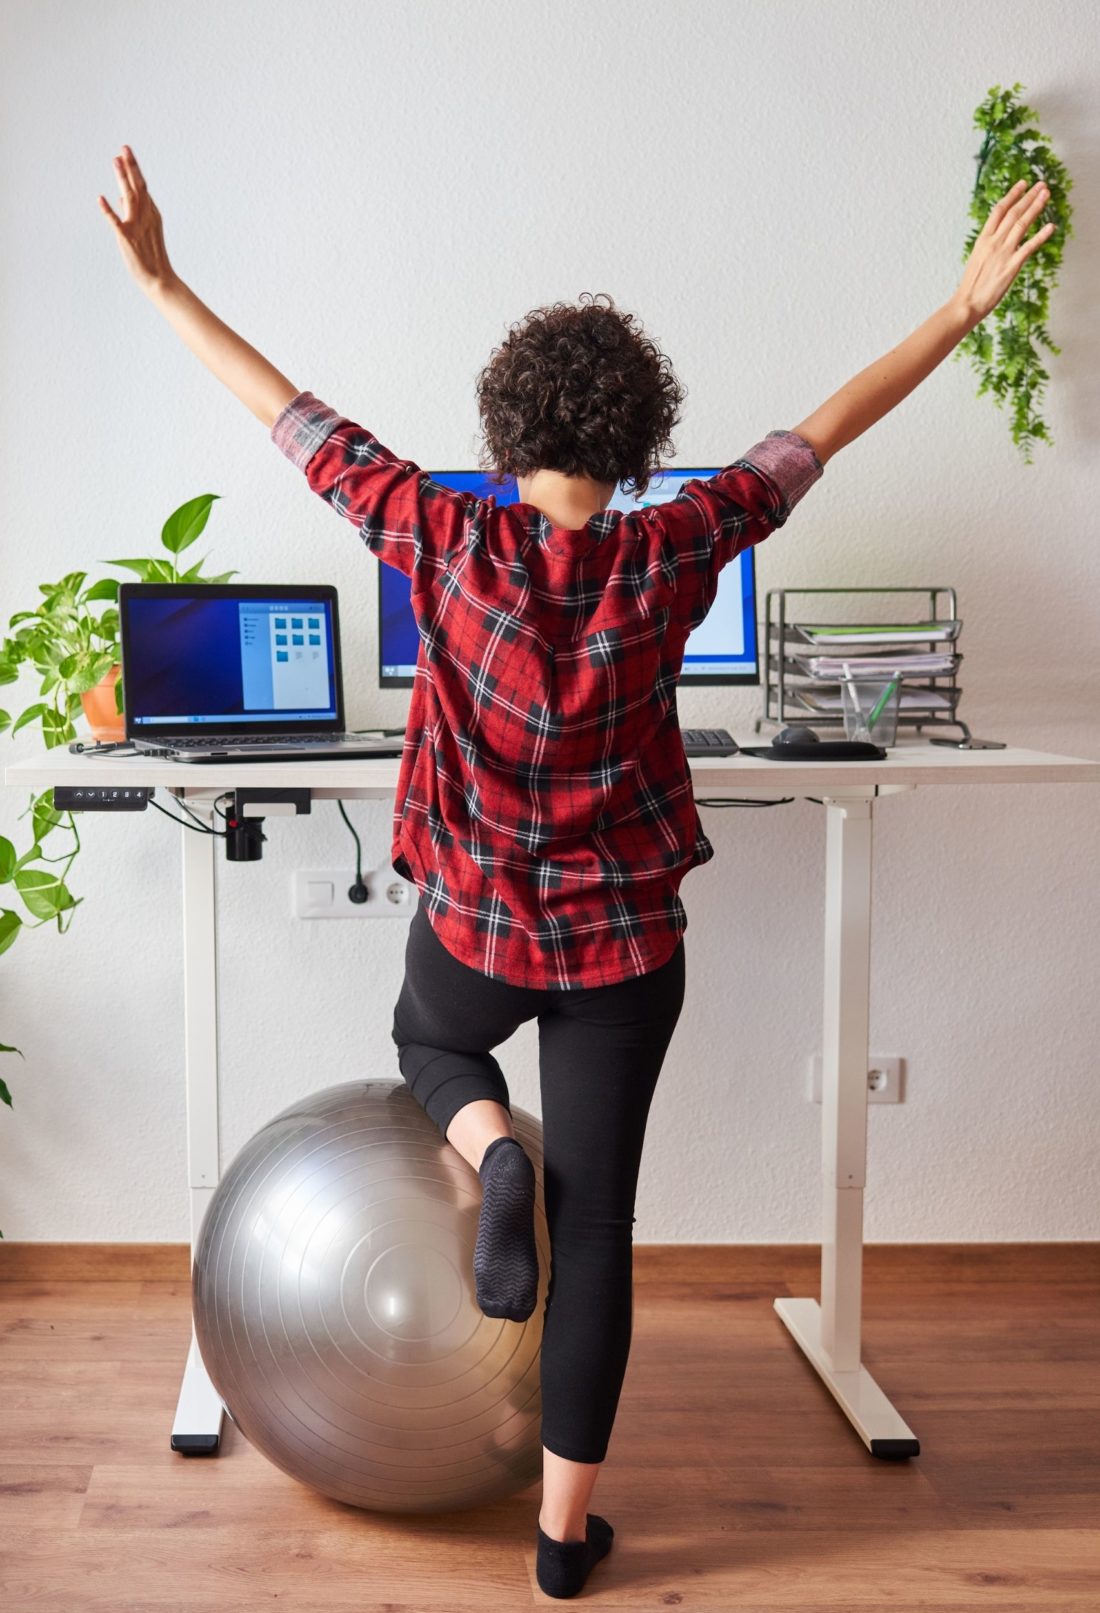 Effective Stretches To Do At Your Desk